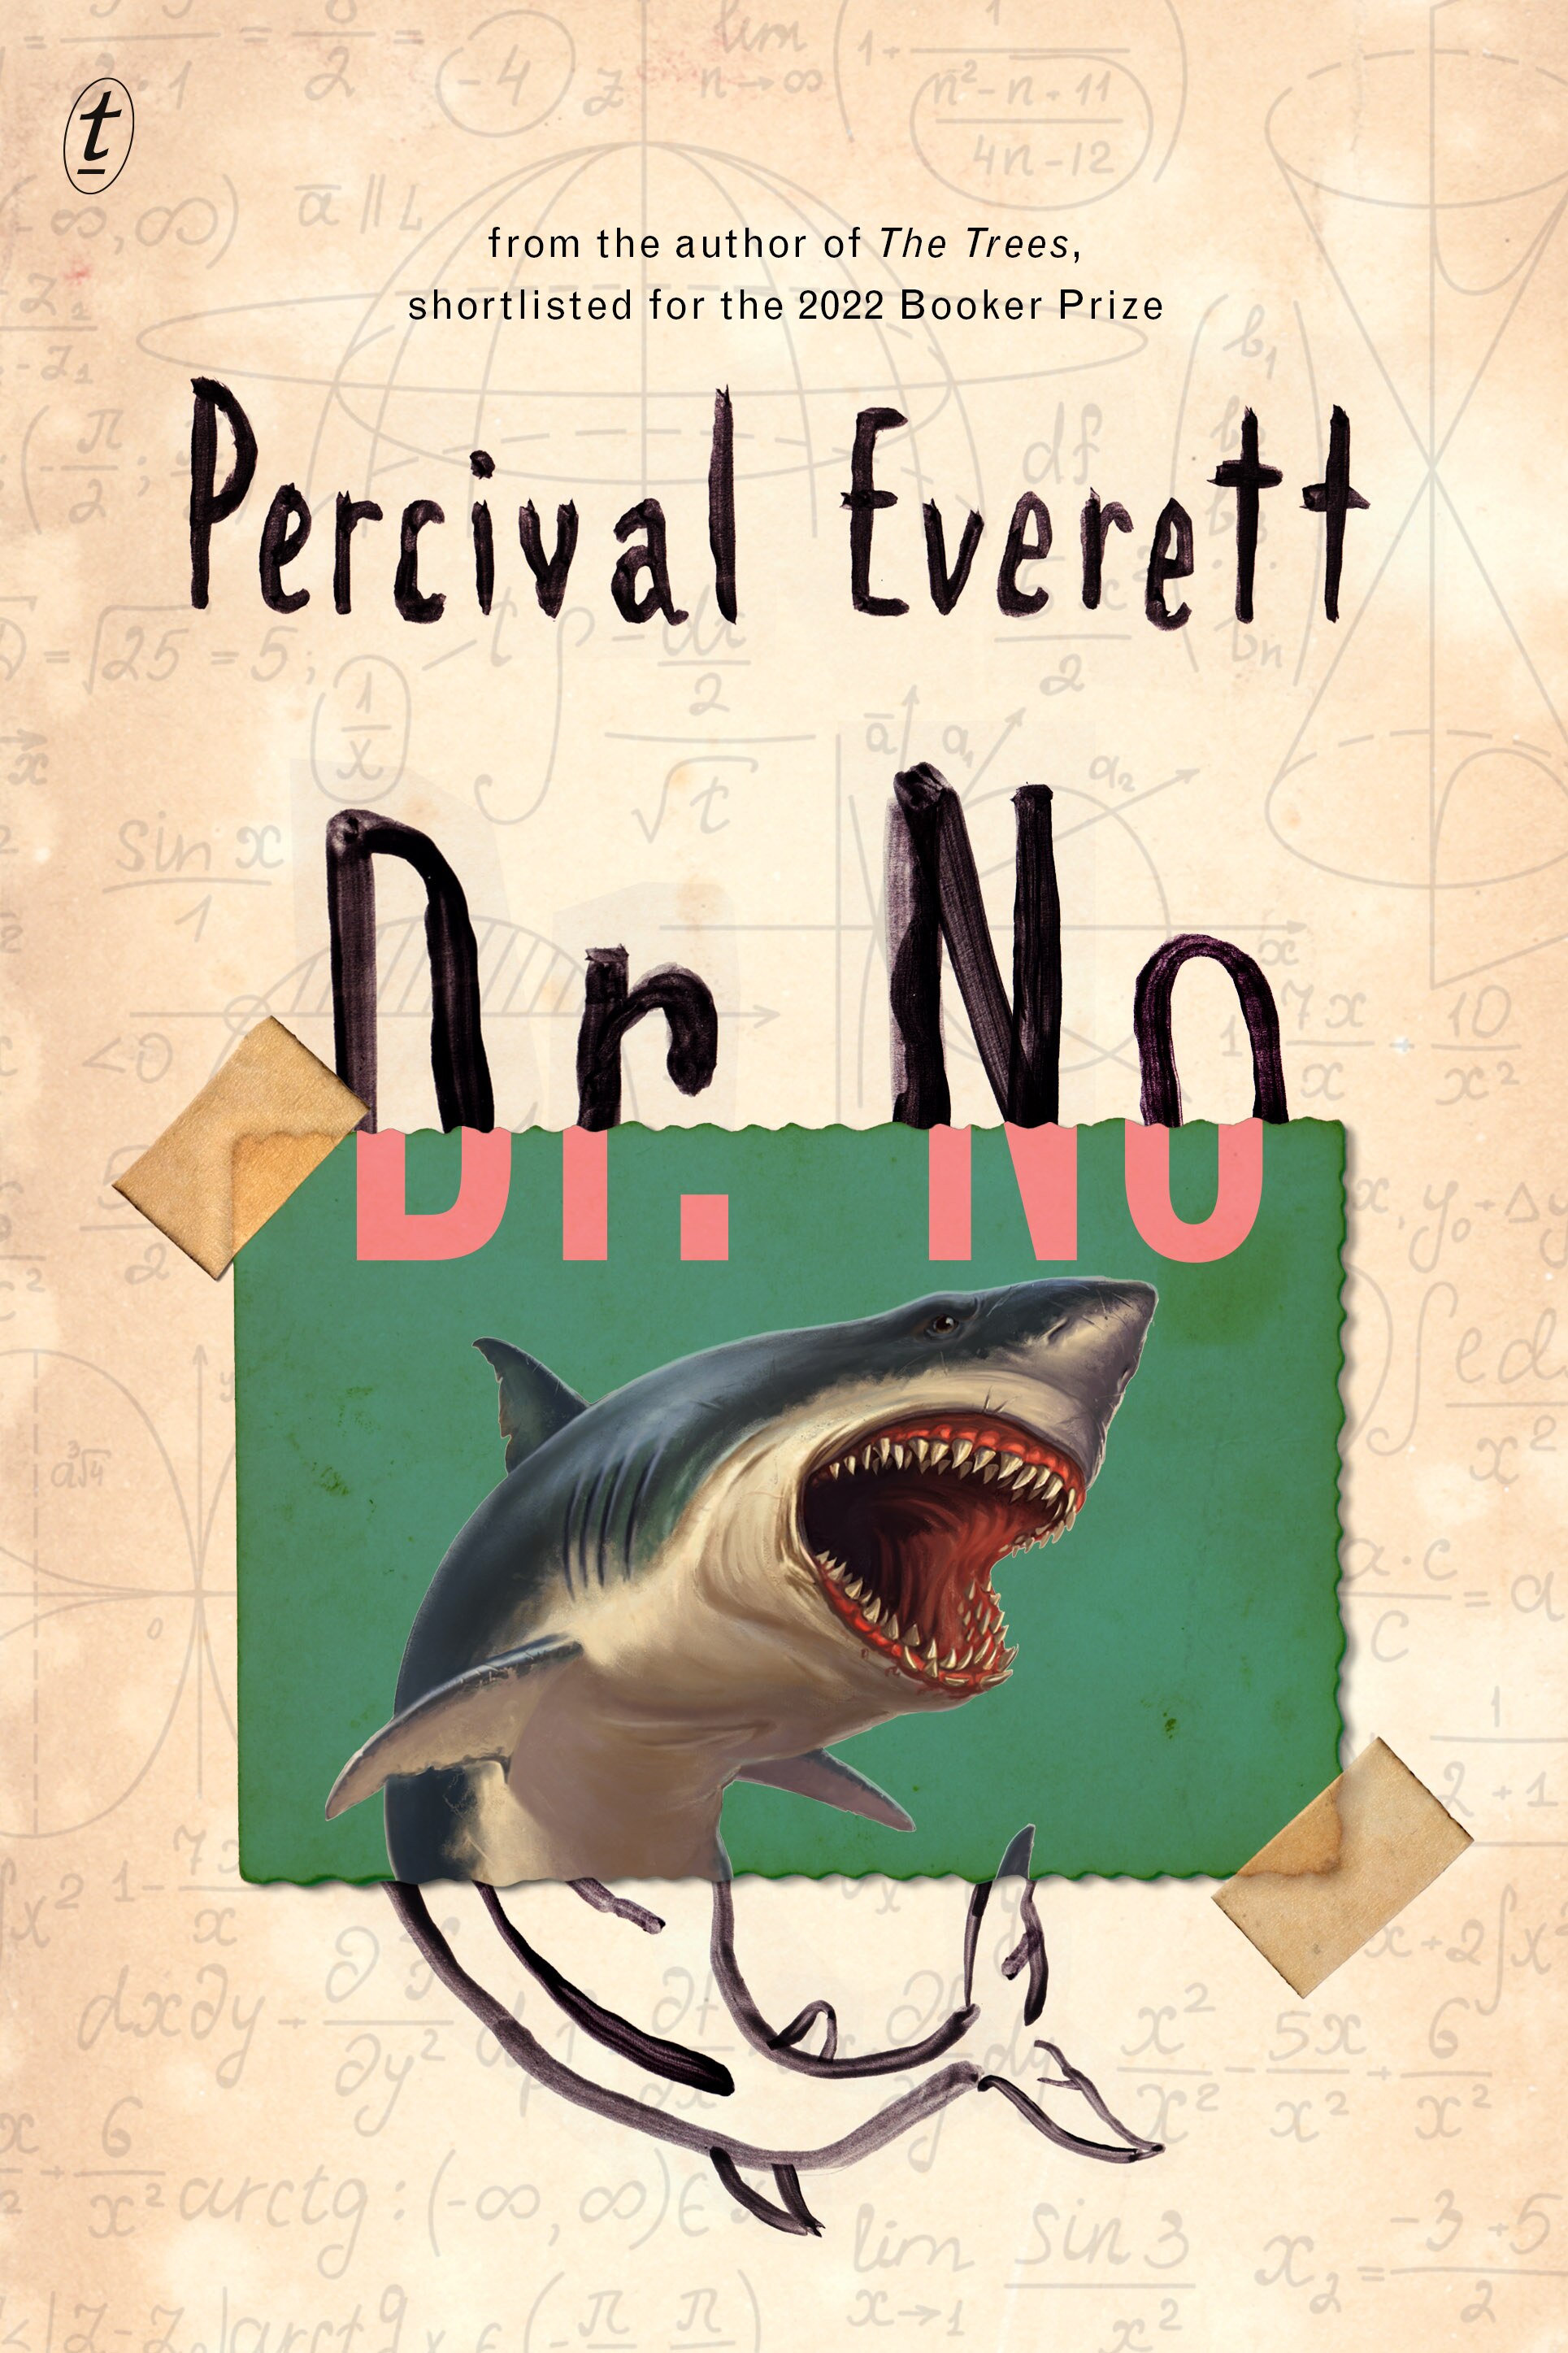 A book cover showing a photograph of a shark with its jaws open taped onto a beige background